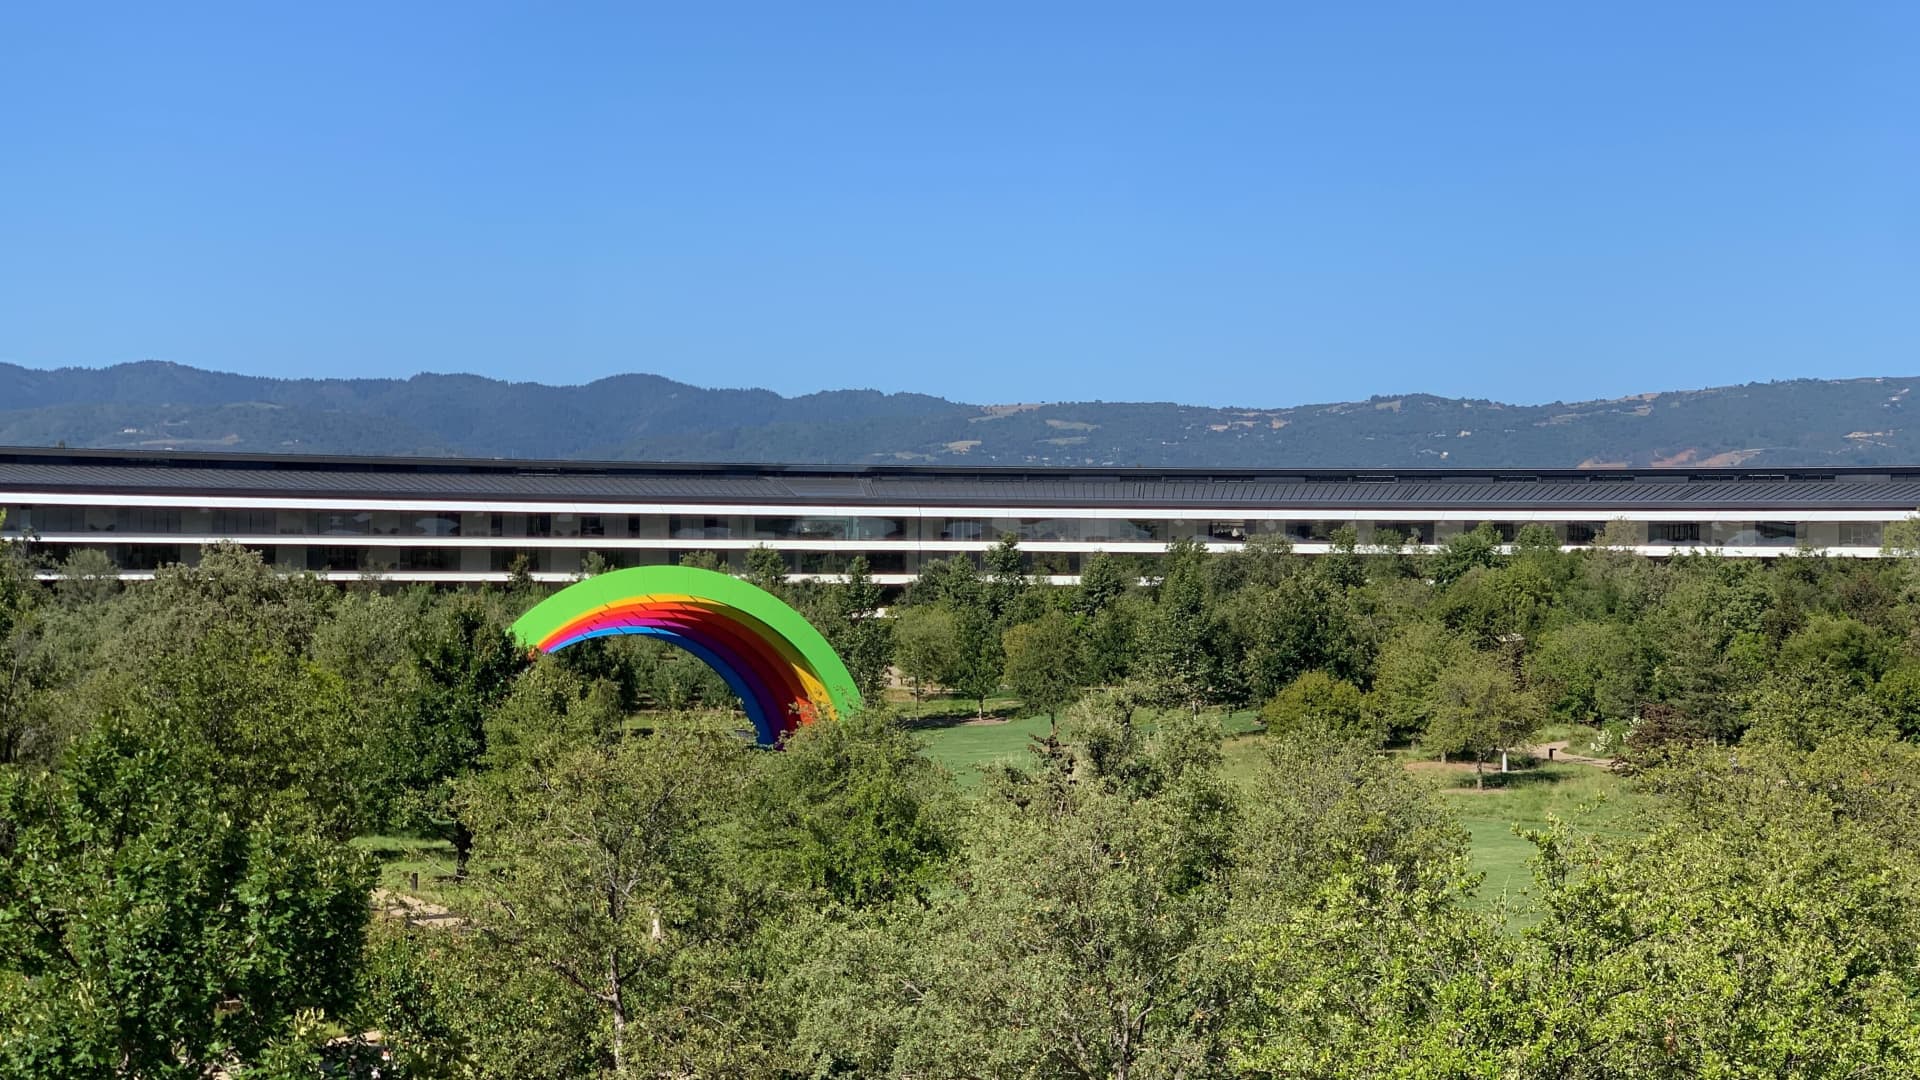 Inside Apple's Spaceship campus for WWDC 2022